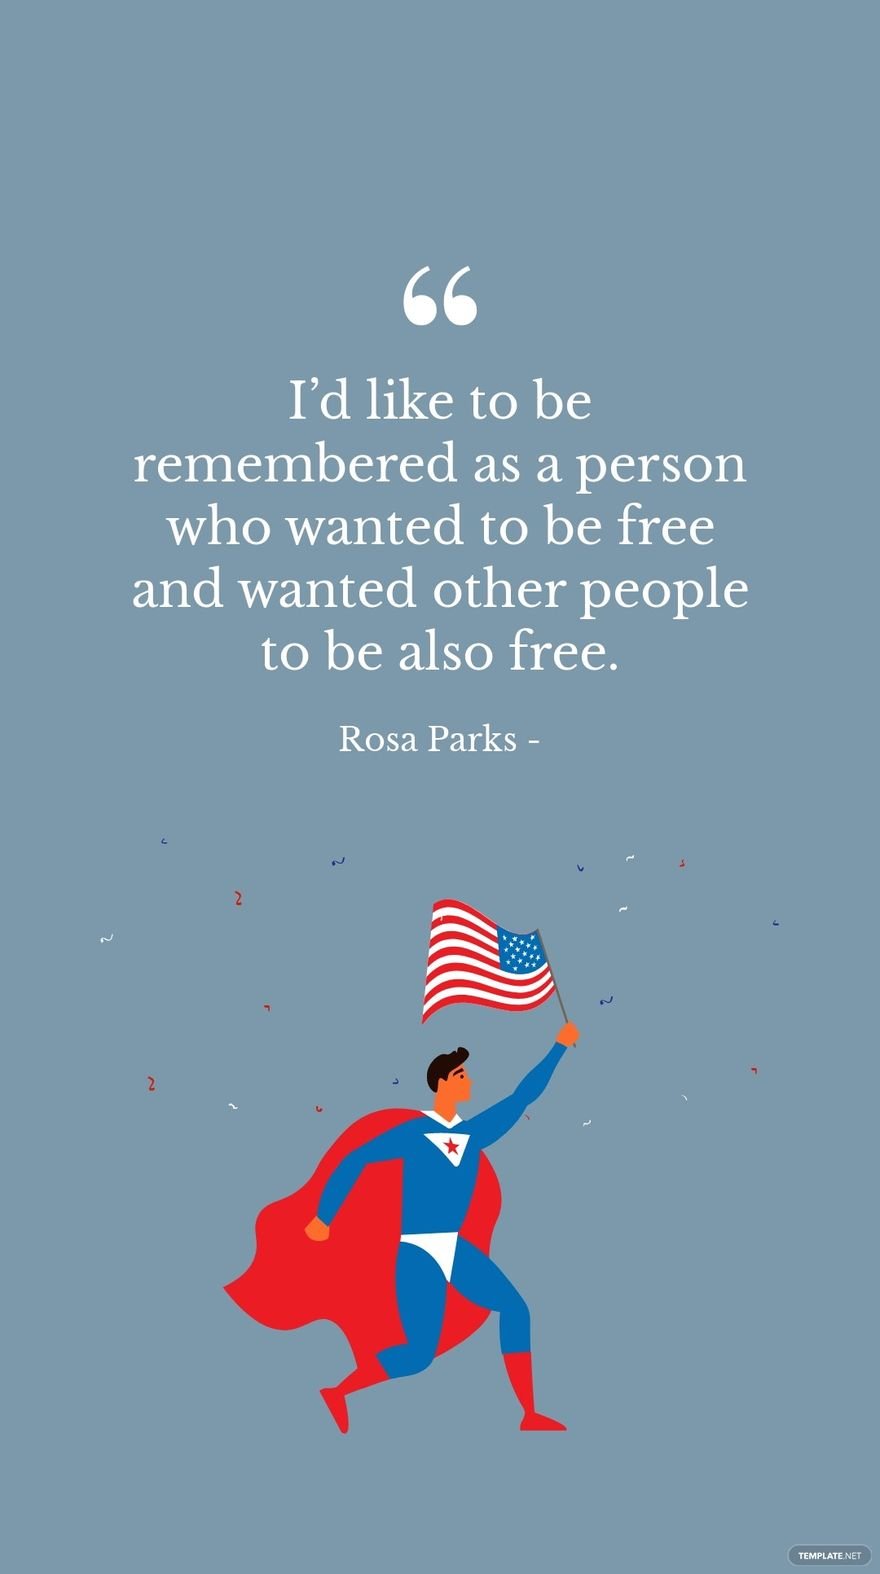 Rosa Parks - I’d like to be remembered as a person who wanted to be free and wanted other people to be also free.